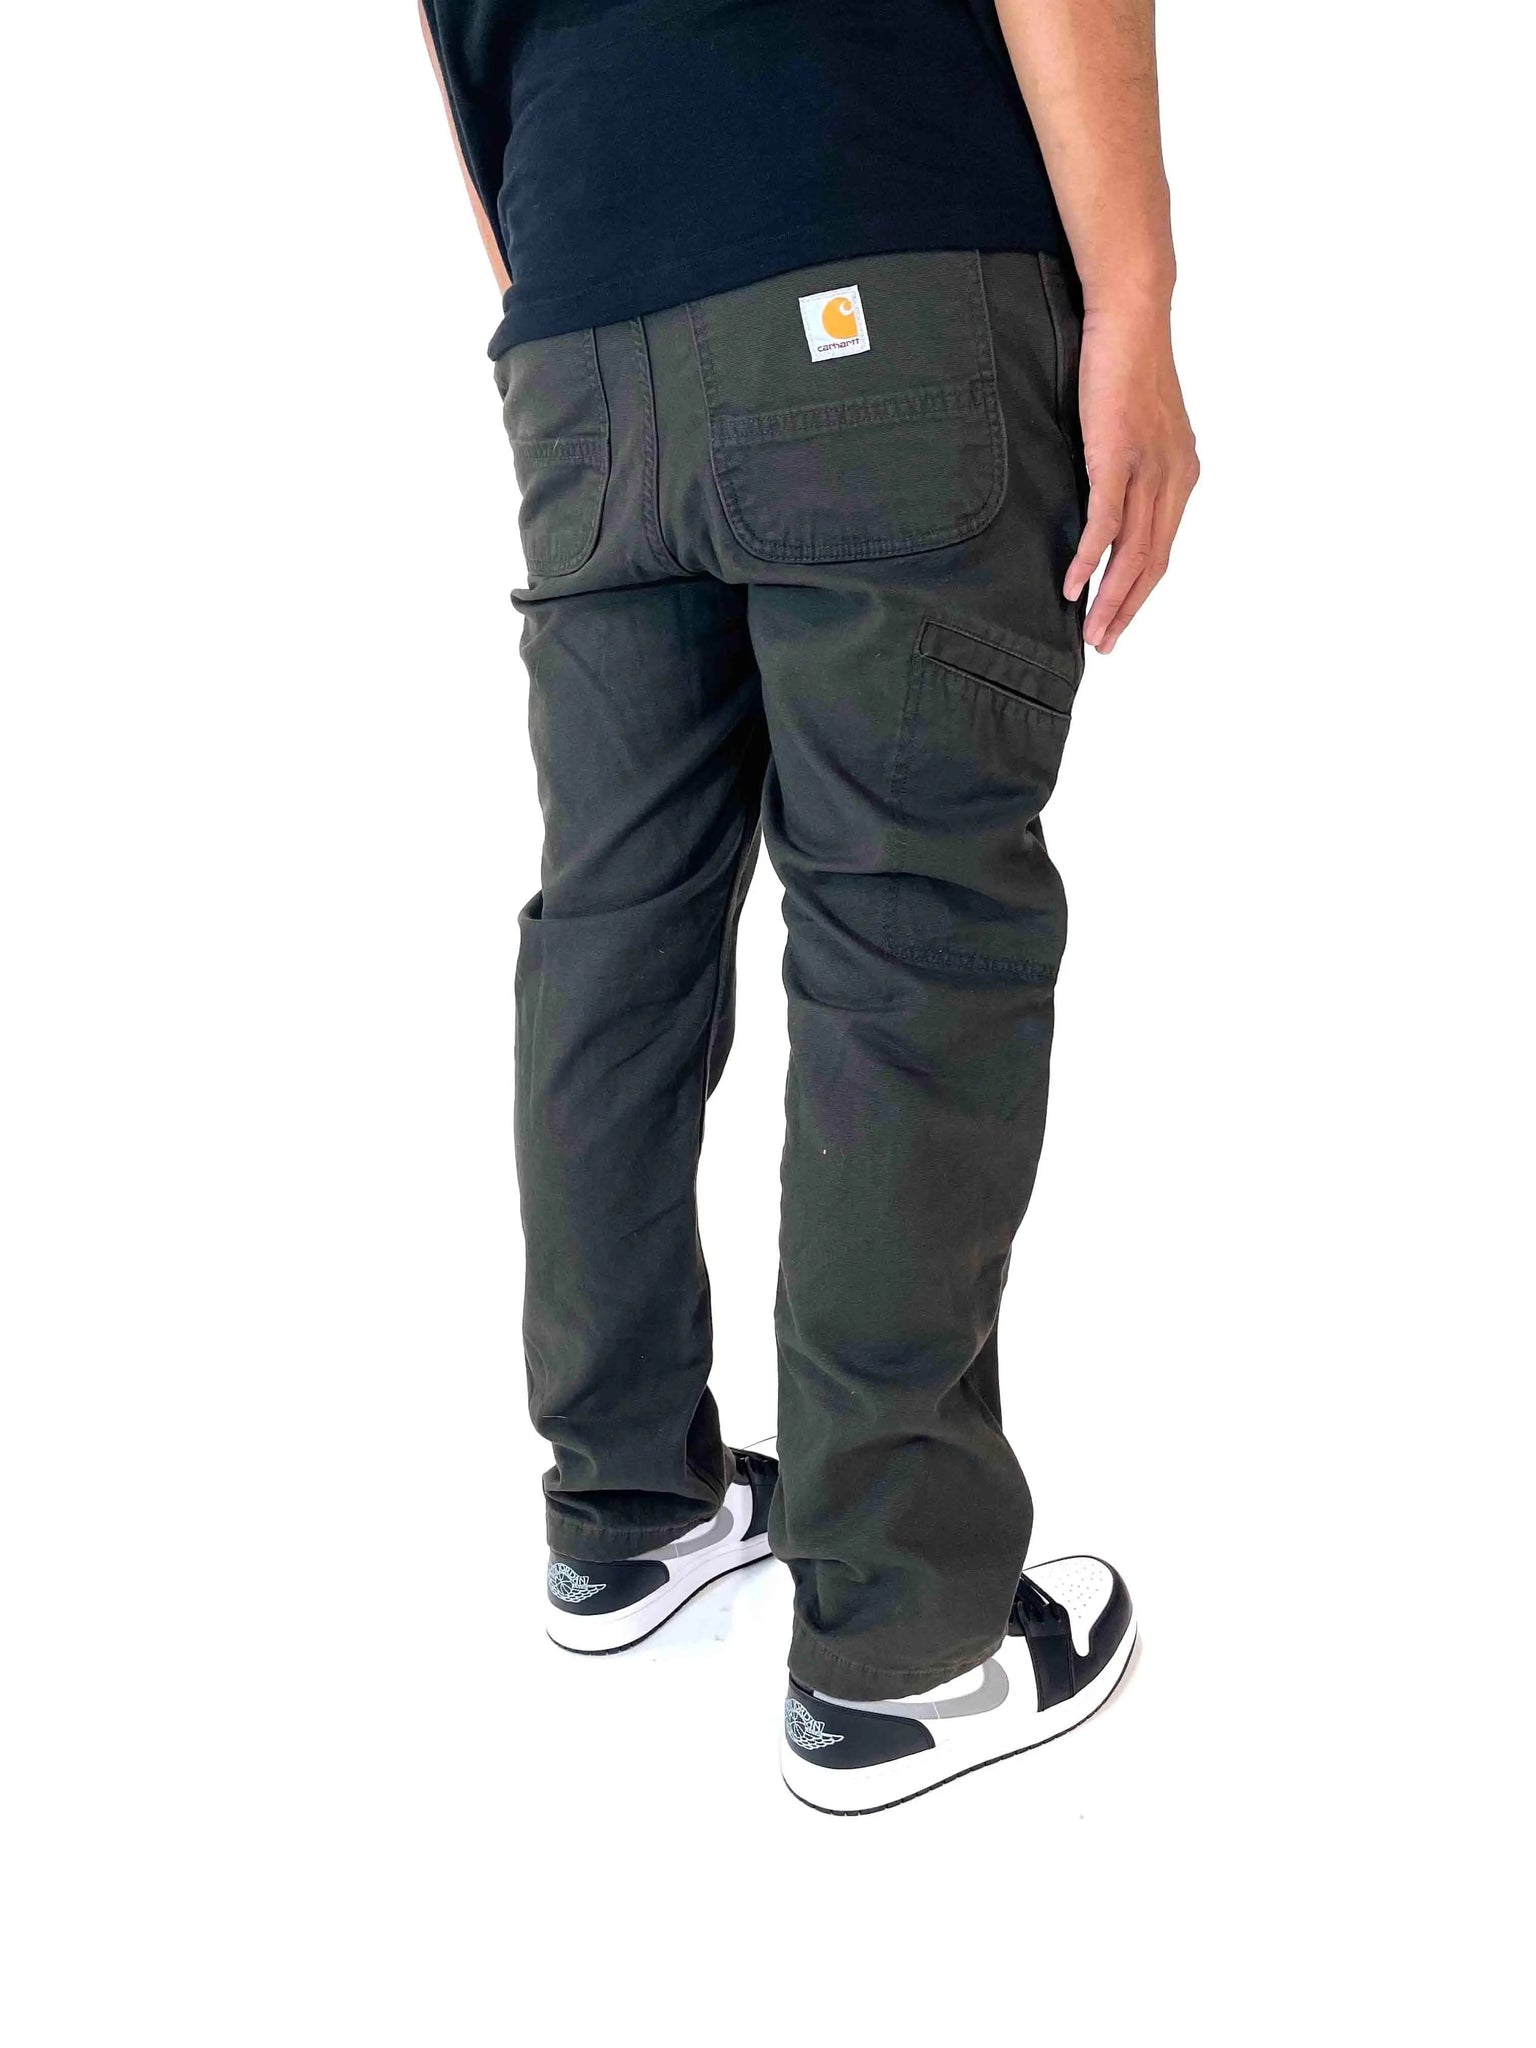 Carhartt Knit Lined Rugged Flex Rigby Dungaree Peat Prior